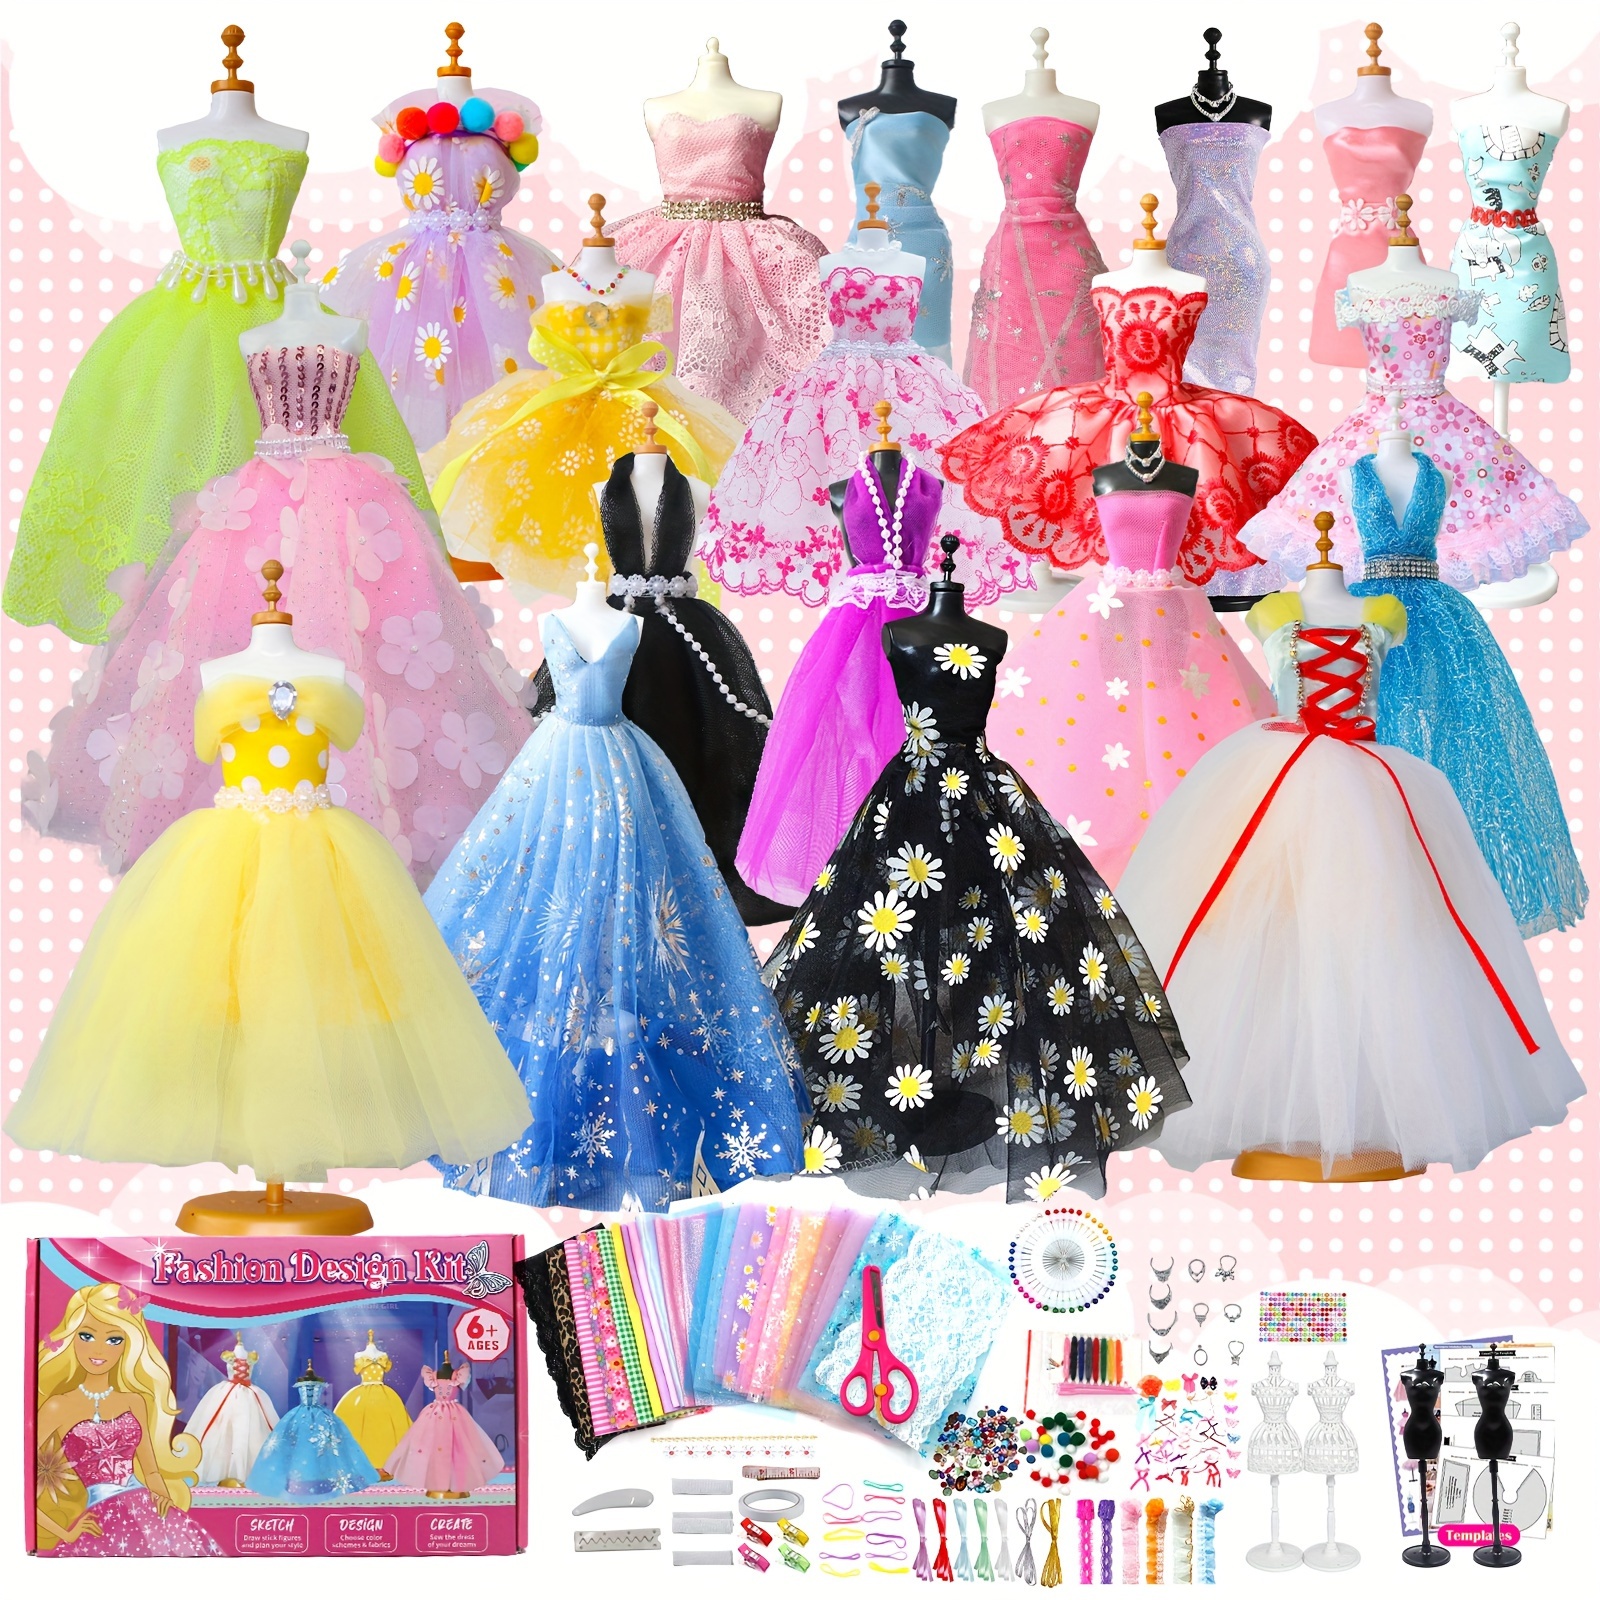 

1set 600+pcs Fashion Designer Kit Creativity Diy Arts & Crafts Kit For Young People With Fashion Design Sketchbook, 4 Mannequins, Sewing Kit For Teen Birthday Gift